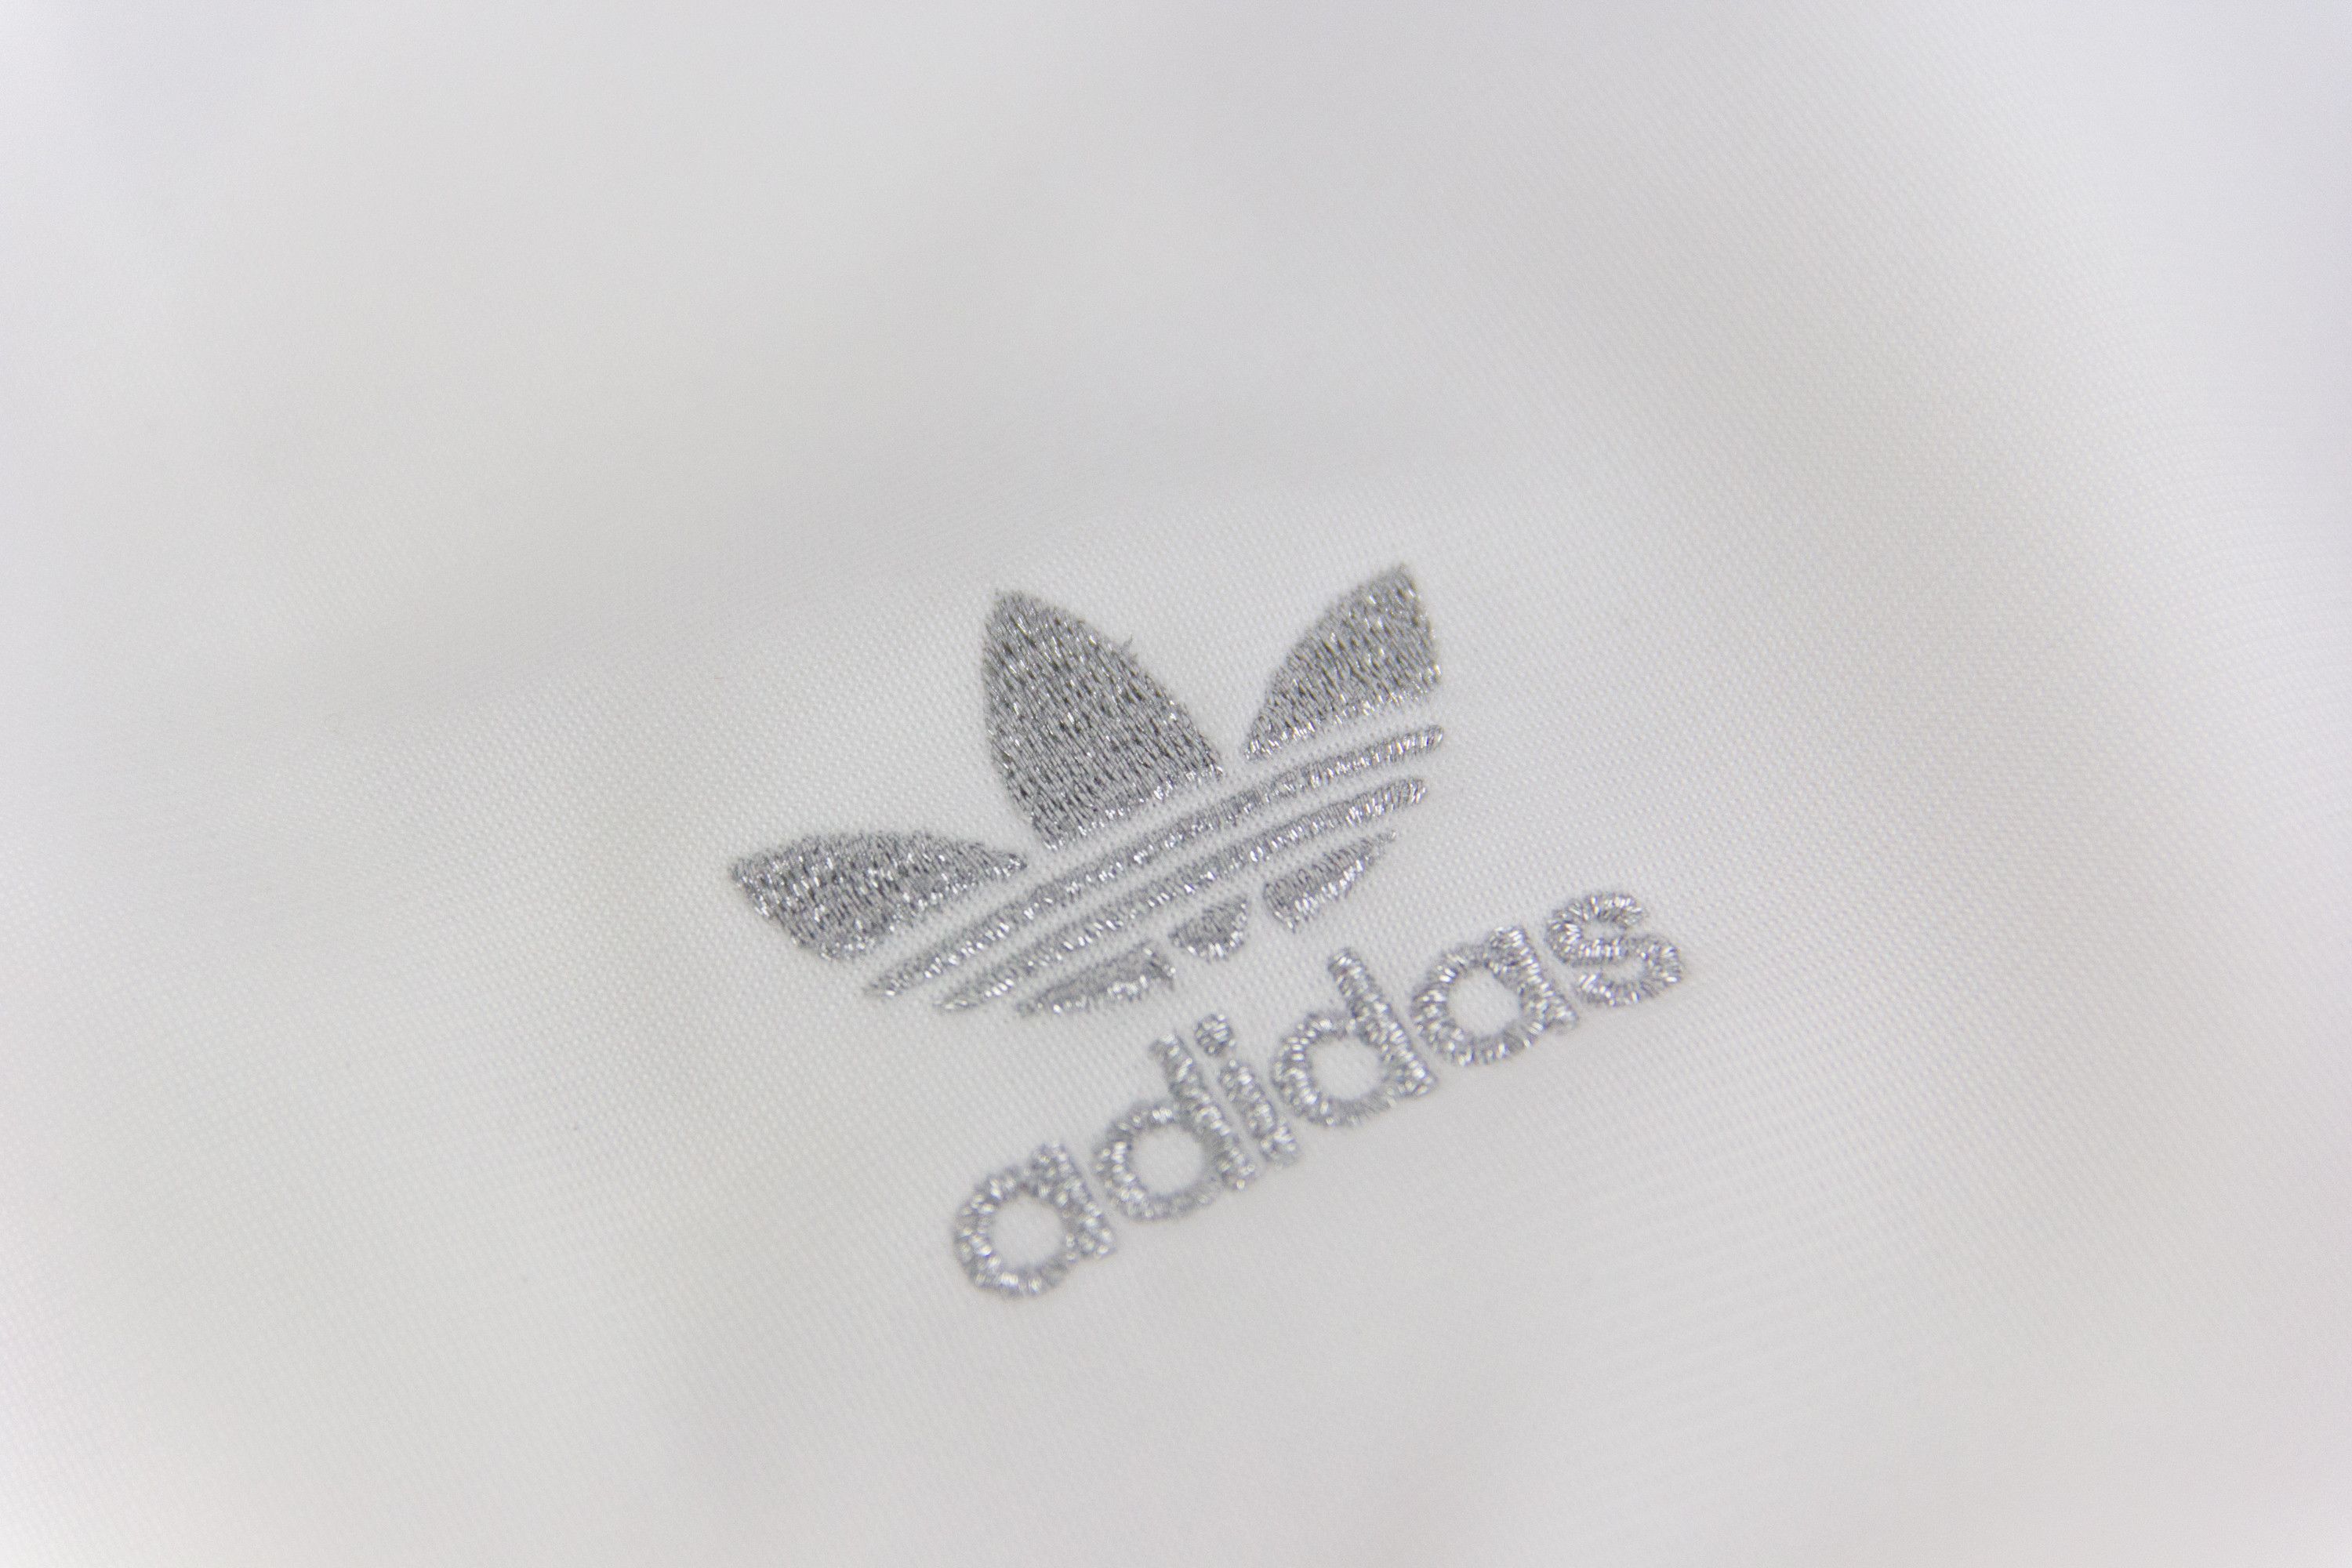 Adidas Adidas Originals White Track Jacket with Silver Stripes, Size M Size US M / EU 48-50 / 2 - 2 Preview